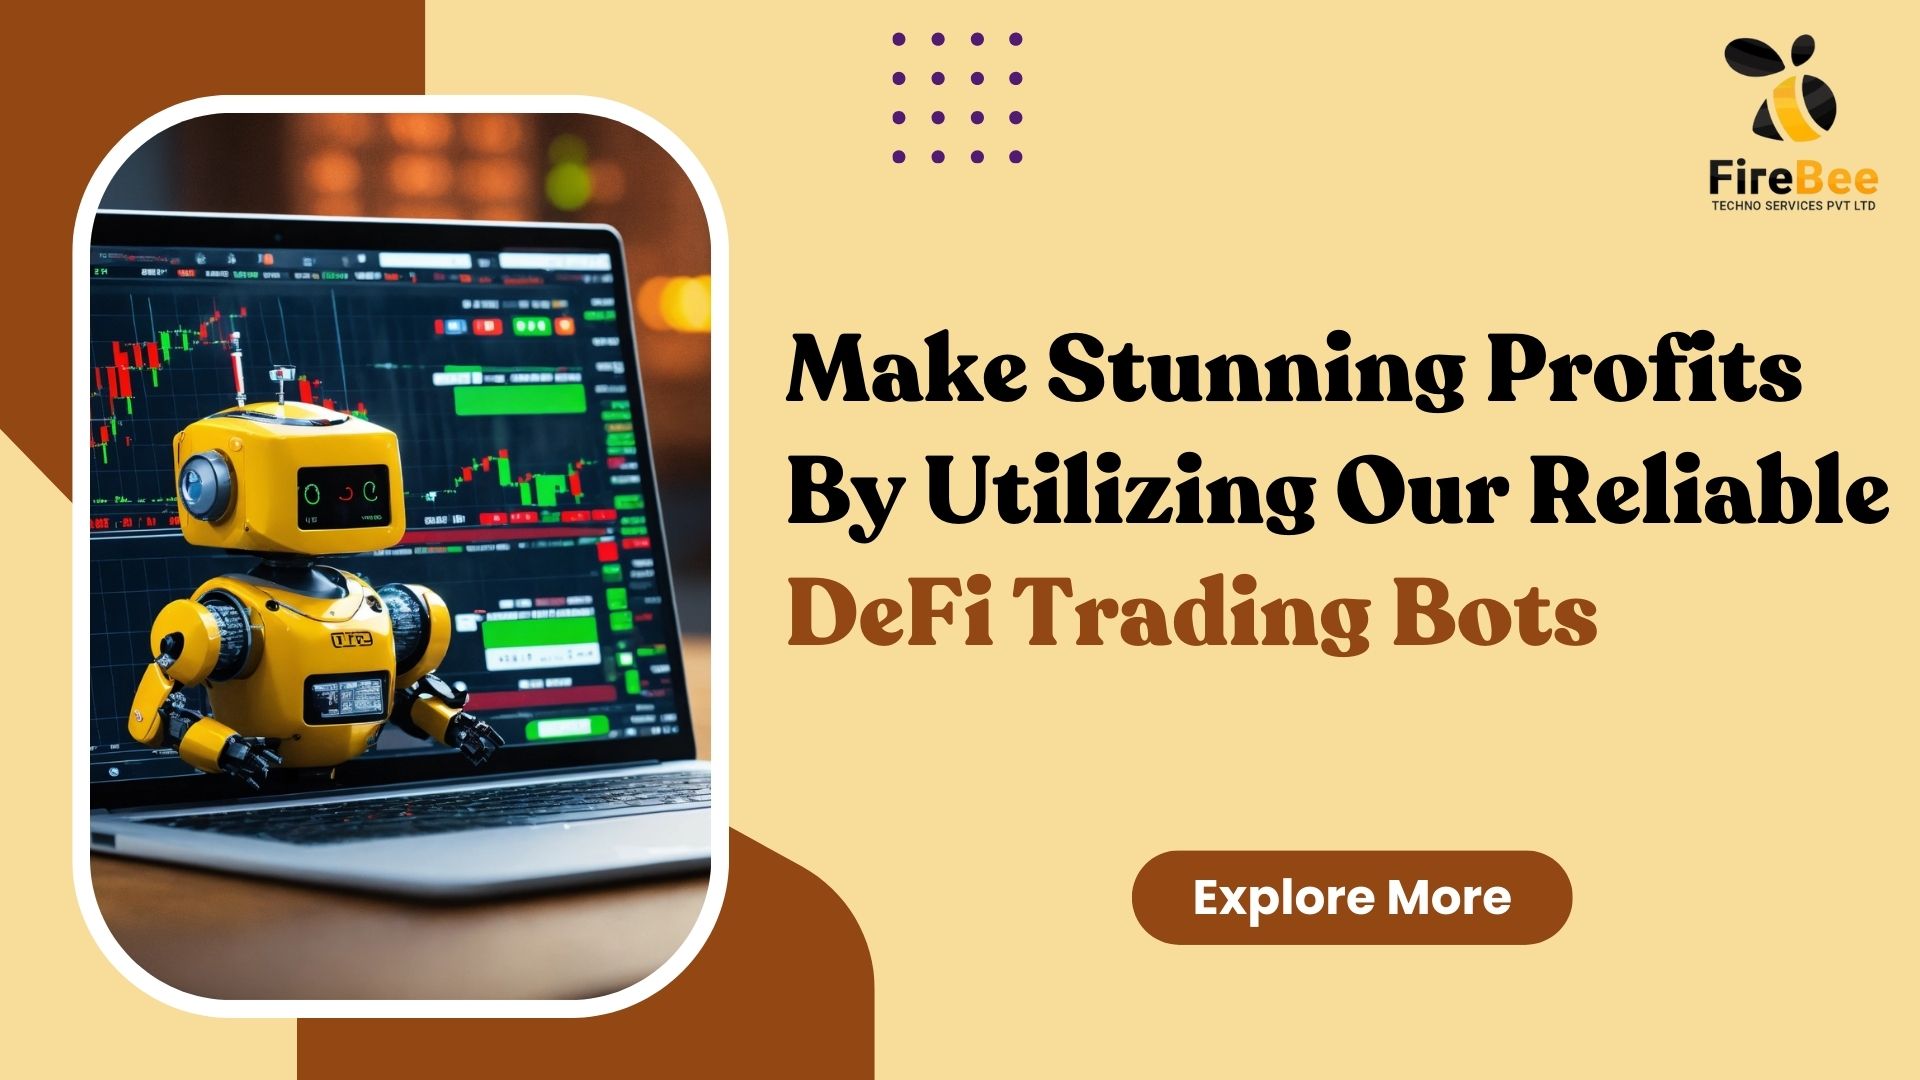 Make Stunning Profits By Utilizing Our Reliable DeFi Trading Bots